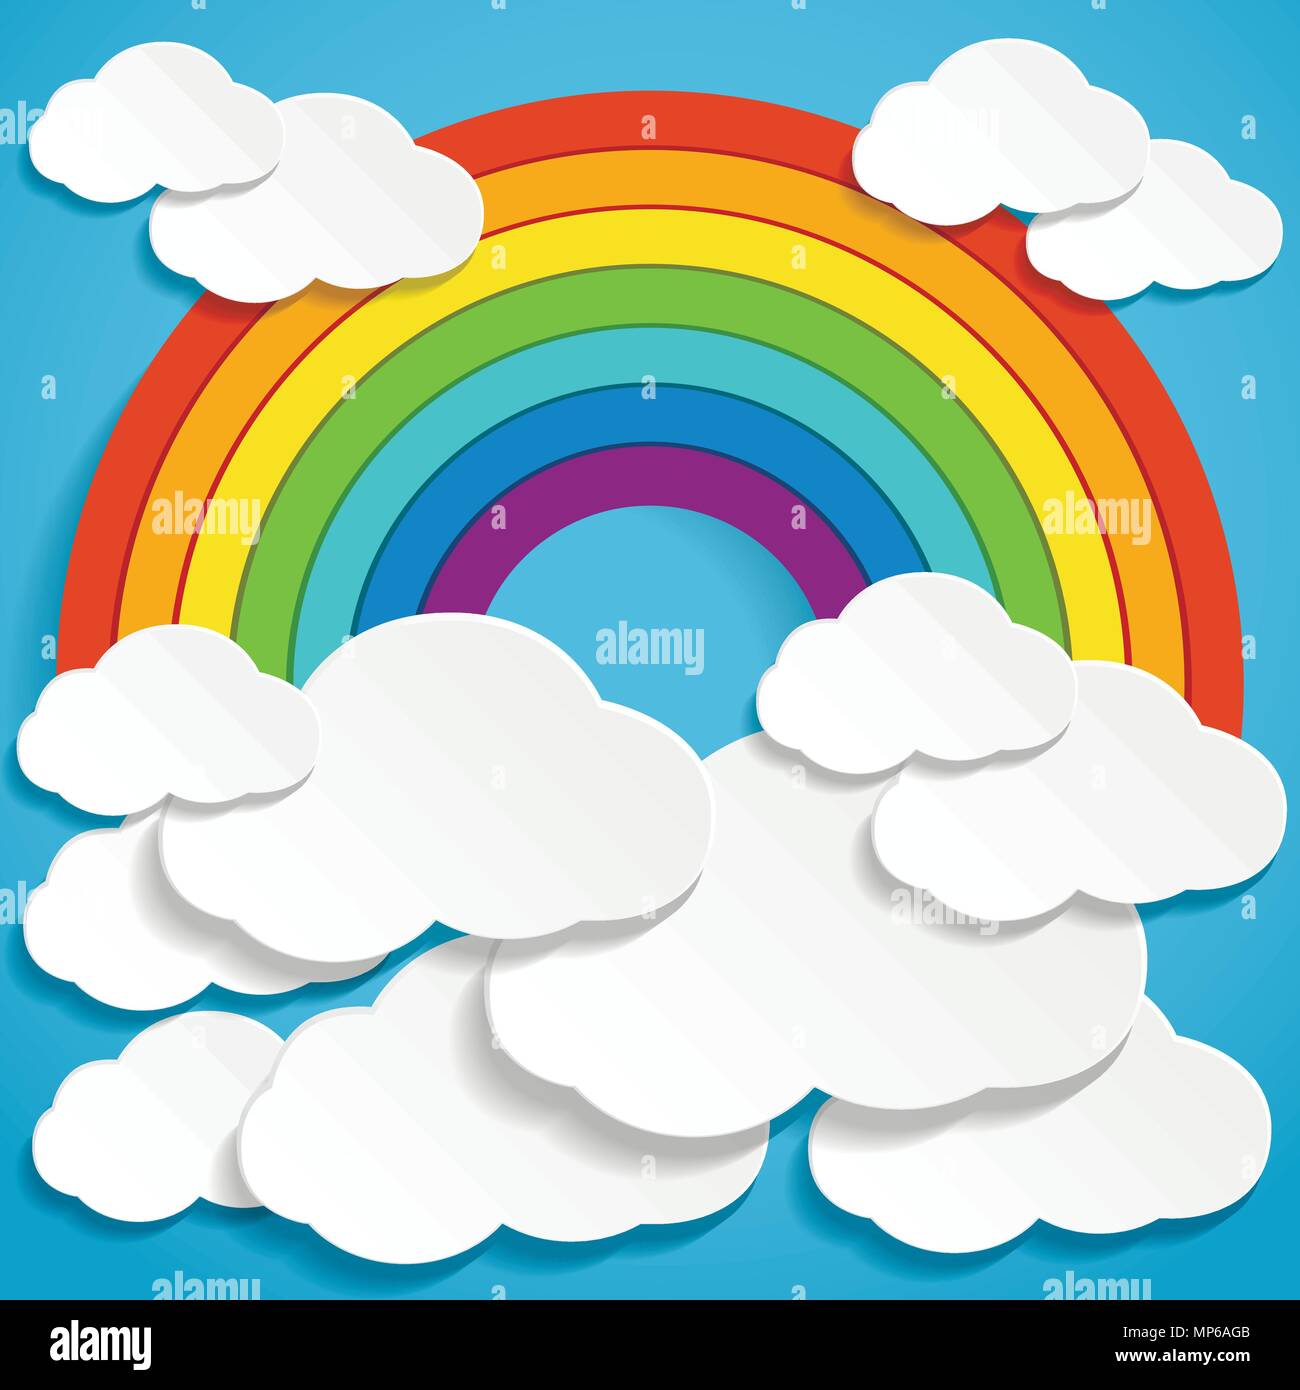 Abstract rainbow and clouds on sky. Paper art style. Vector illustration. Stock Vector